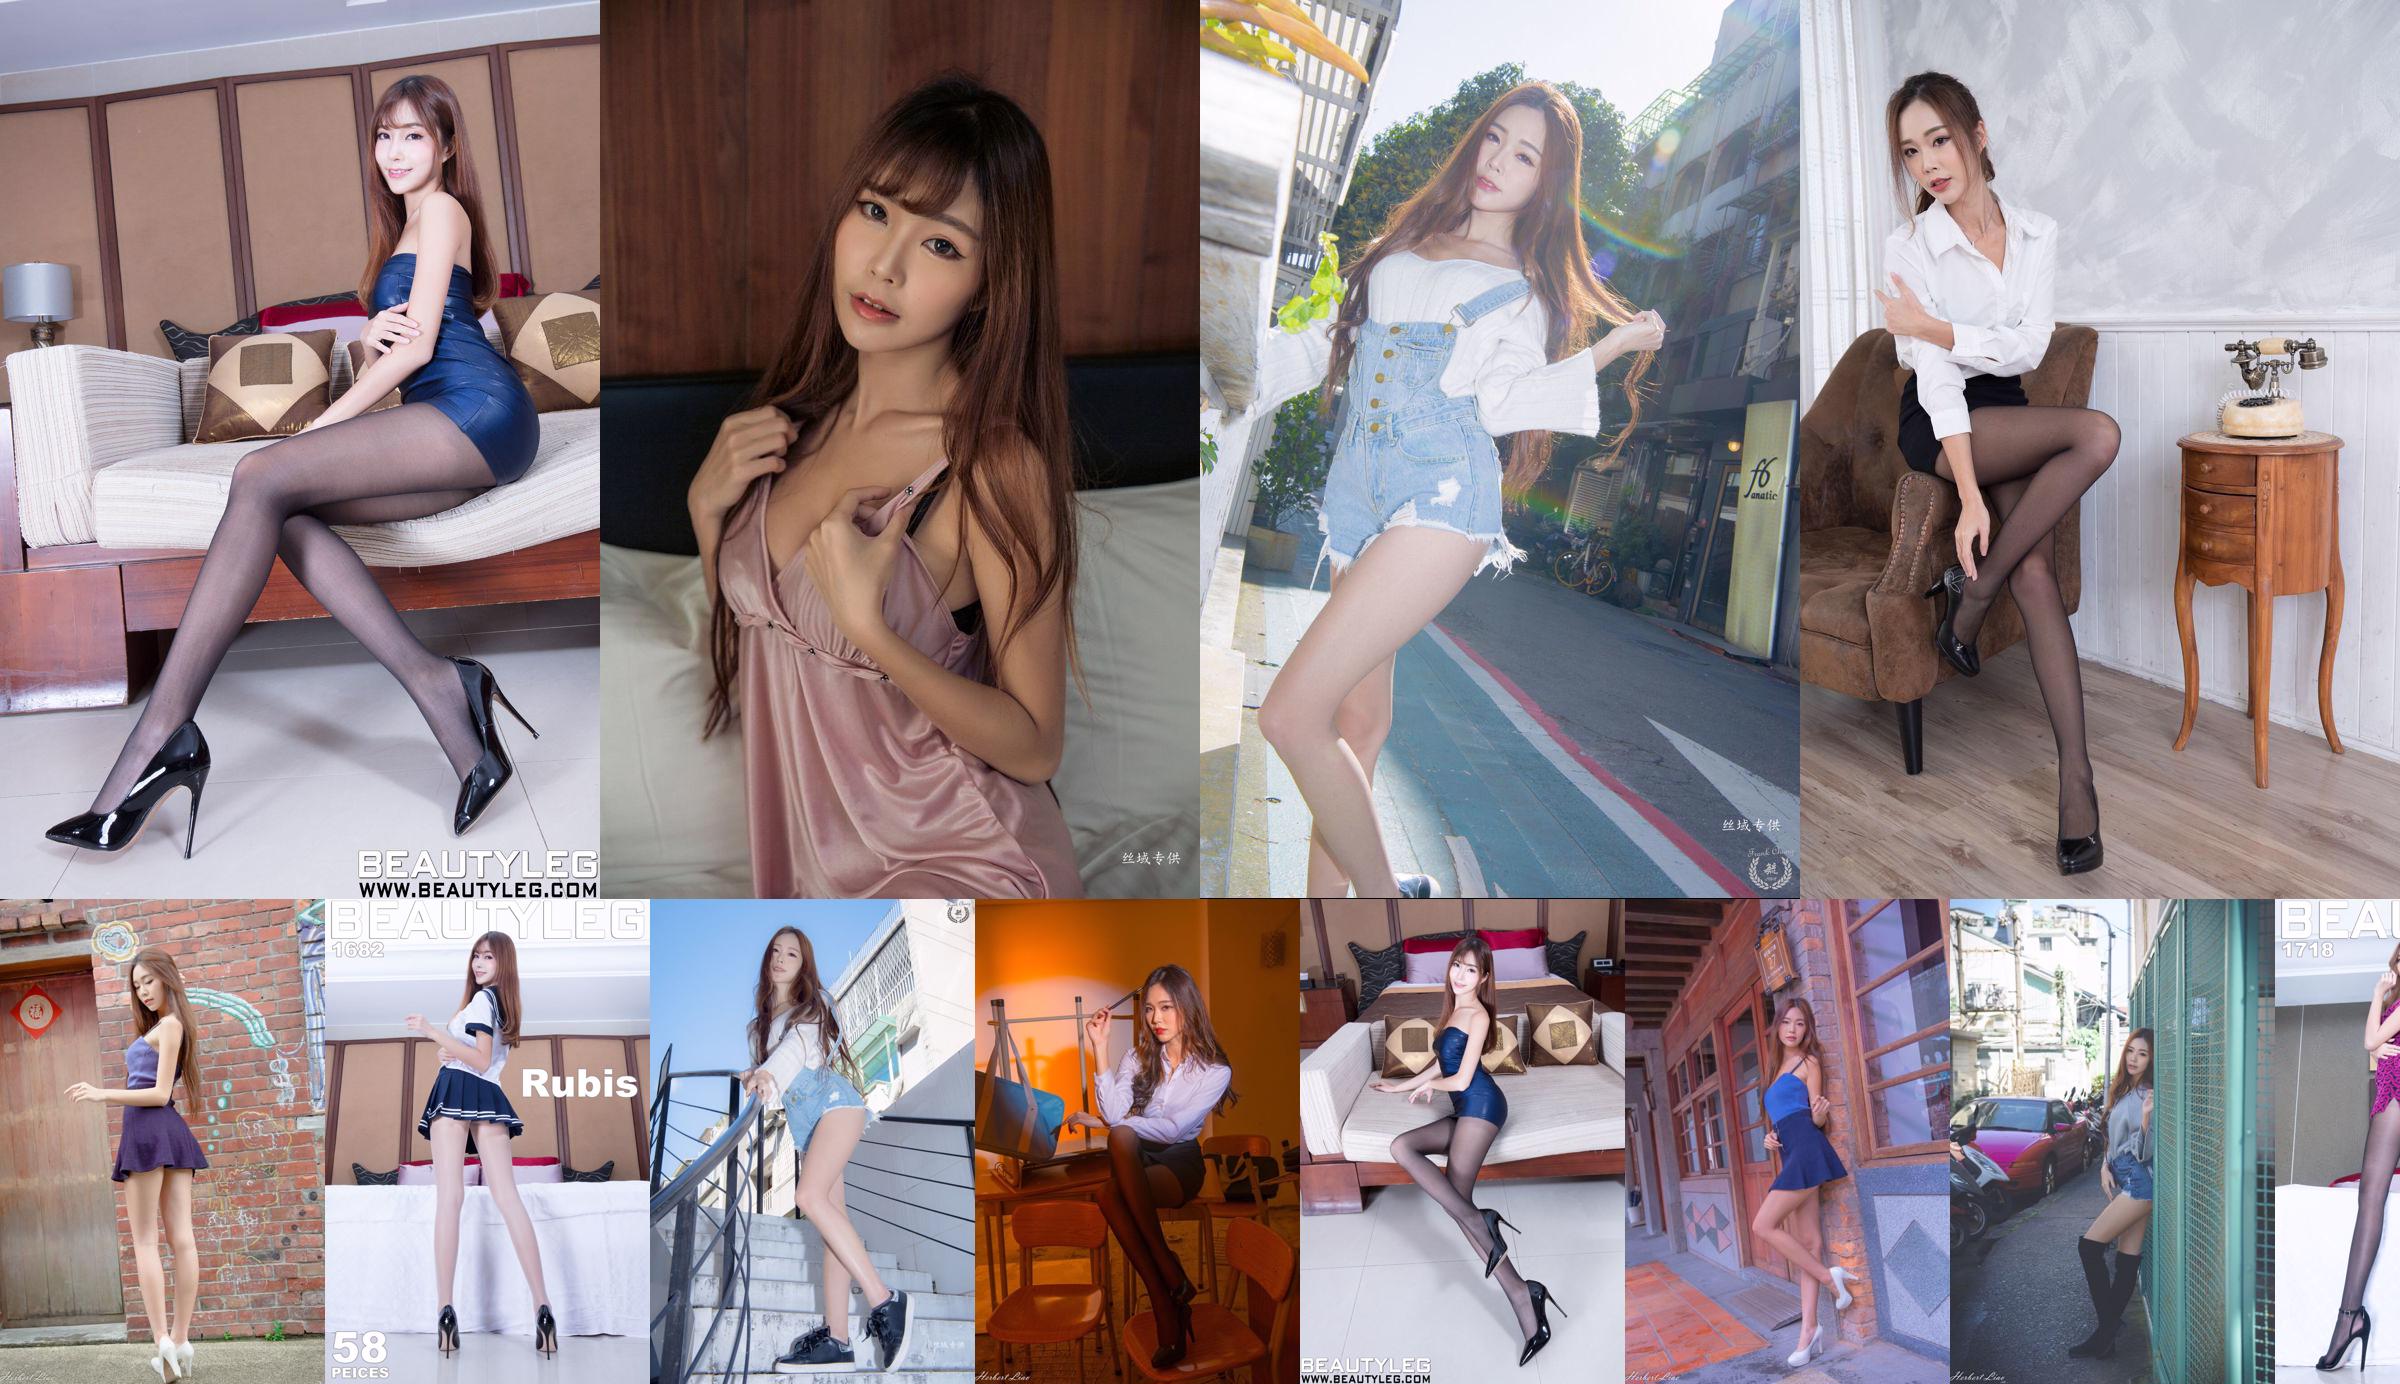 [Jeune mannequin de Taiwan] Huang Shangyan Rubis "Pyjama Sexy + Chemise Blanche + Collection OL" No.b2f219 Page 3